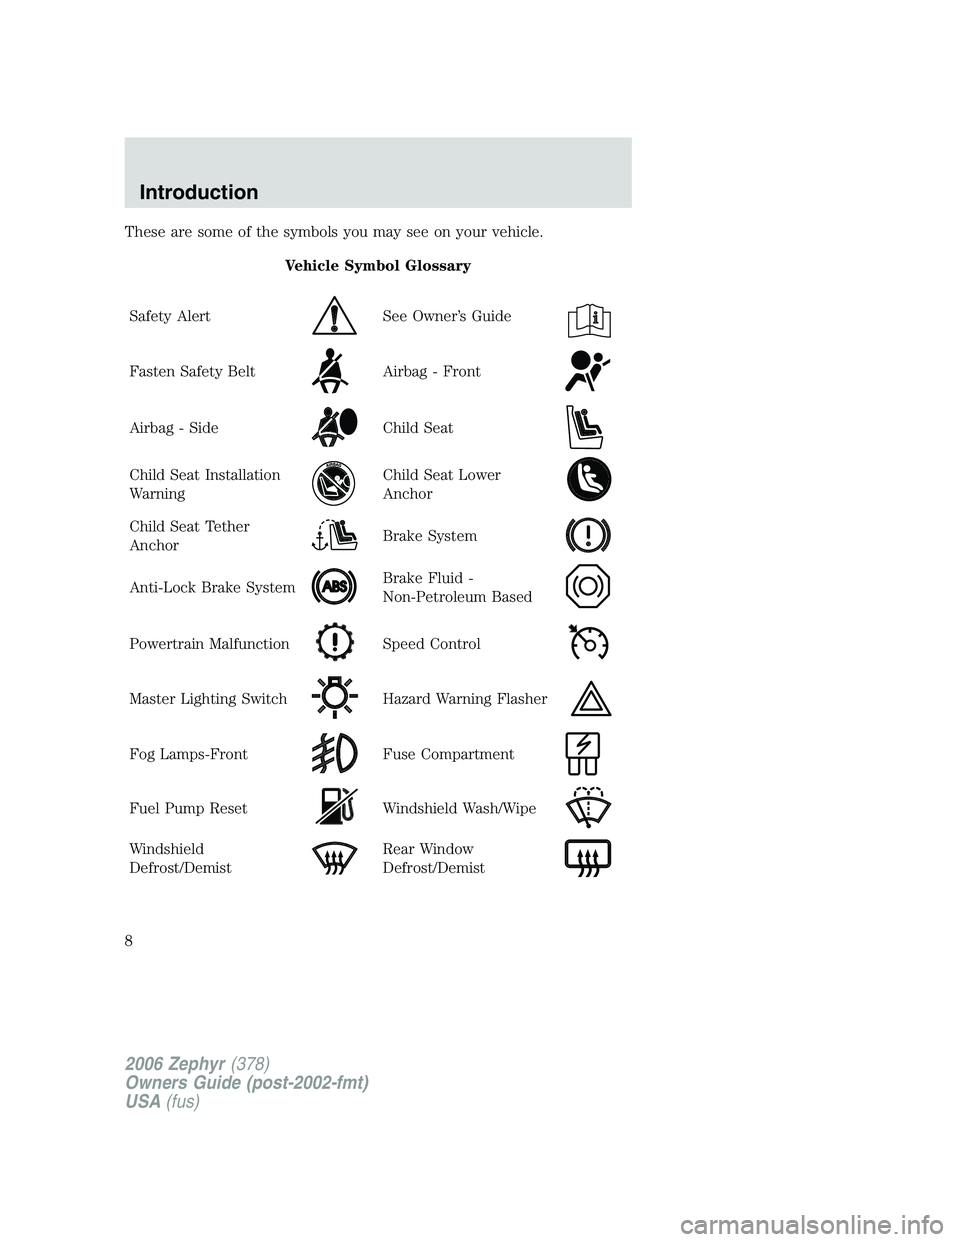 LINCOLN ZEPHYR 2006  Owners Manual These are some of the symbols you may see on your vehicle.
Vehicle Symbol Glossary
Safety Alert See Owner’s Guide
Fasten Safety Belt Airbag - Front
Airbag - Side Child Seat
Child Seat Installation
W